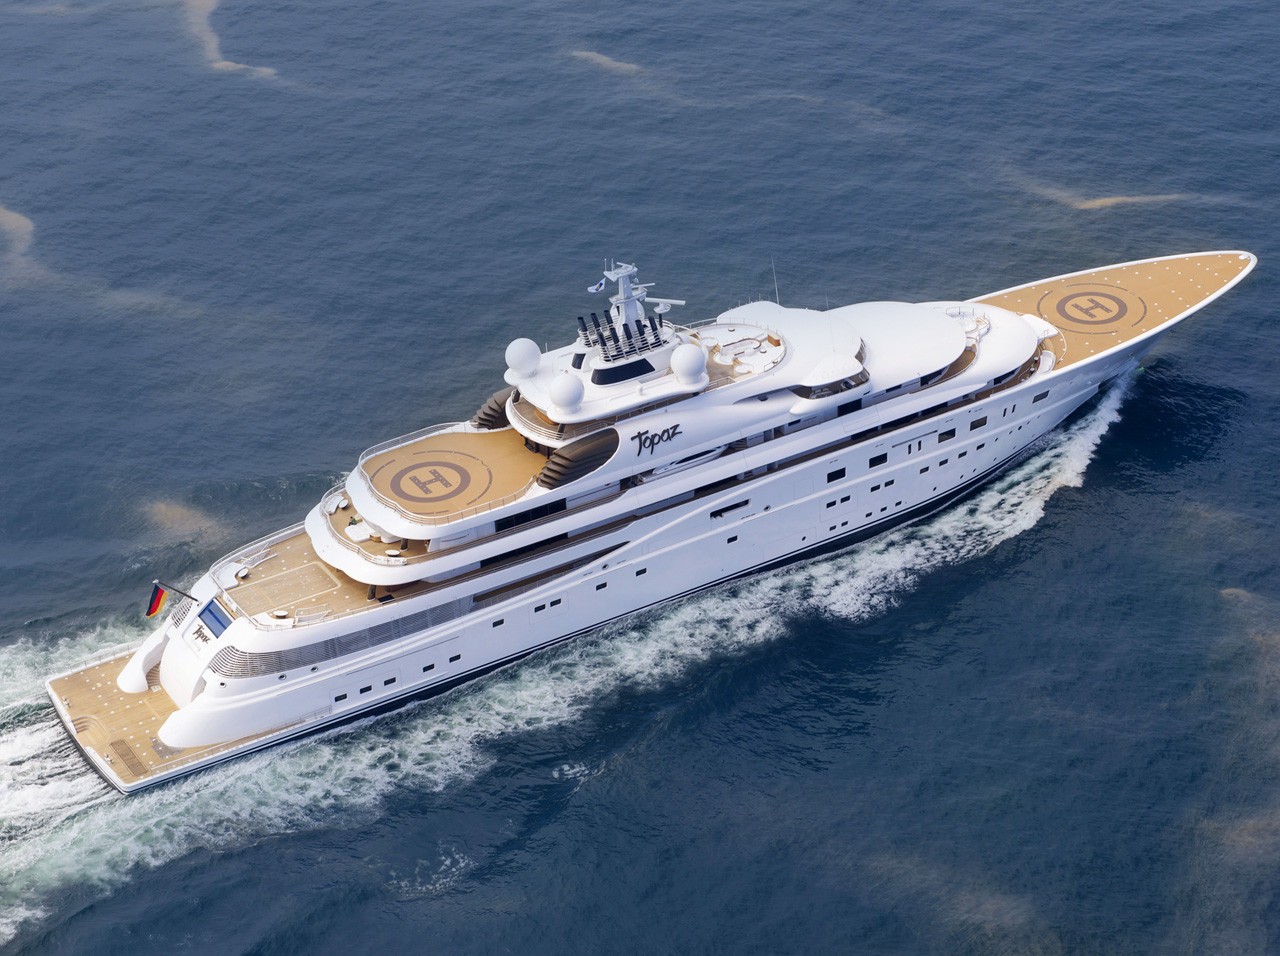 A+ is the new name for the 147m giga yacht TOPAZ — Yacht Charter & Superyacht News